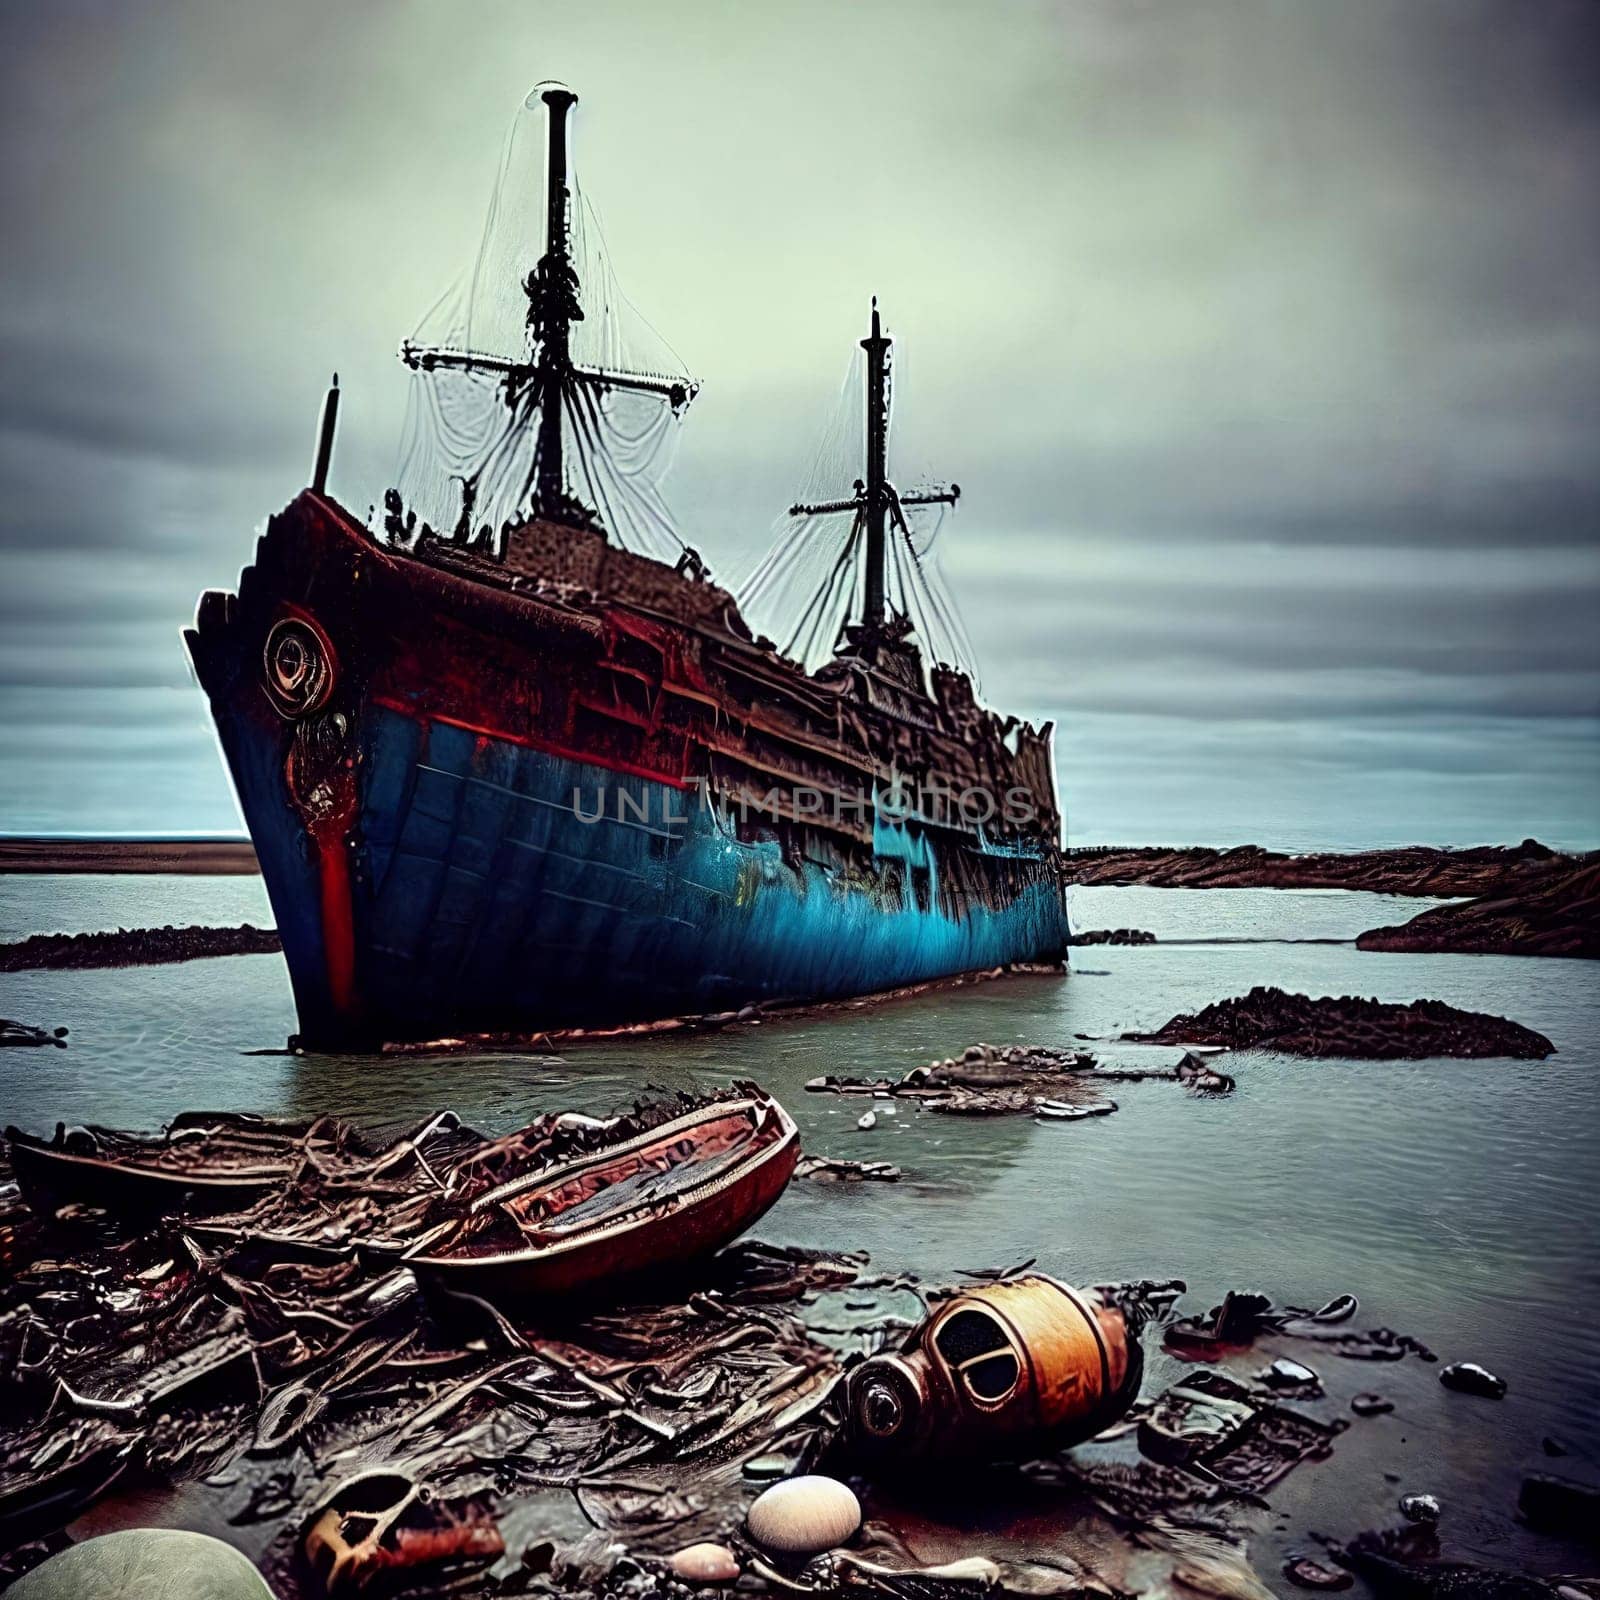 Shipwrecked World. Post-apocalyptic coastal scene with sunken ships, washed-up debris, and a desolate shoreline overlooking a vast and unforgiving sea.